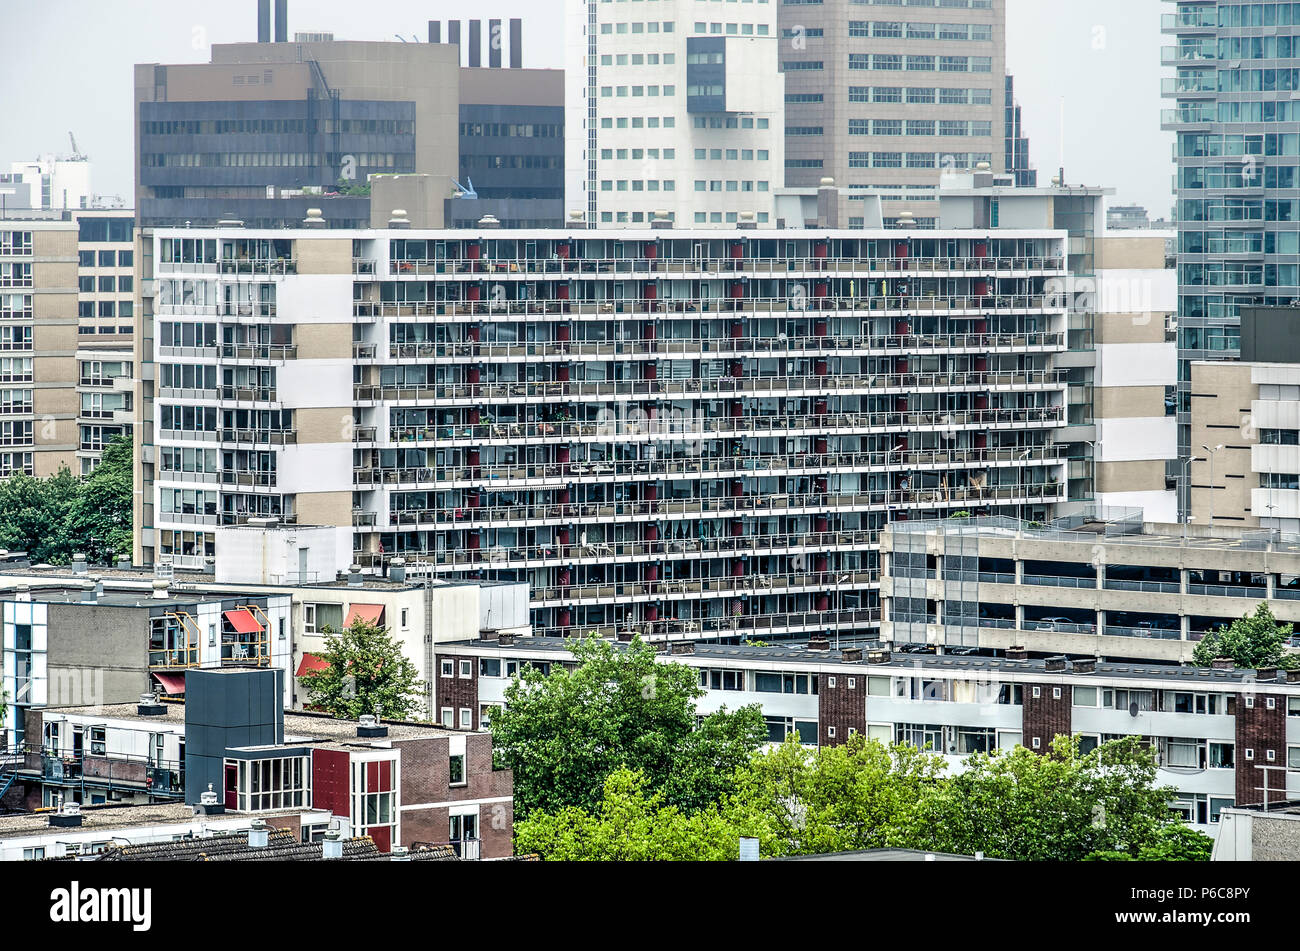 Rotterdam, The Netherlands, June 16, 2018: One of the appartment buildings in the post-war reconstruction area of Lijnbaan Stock Photo